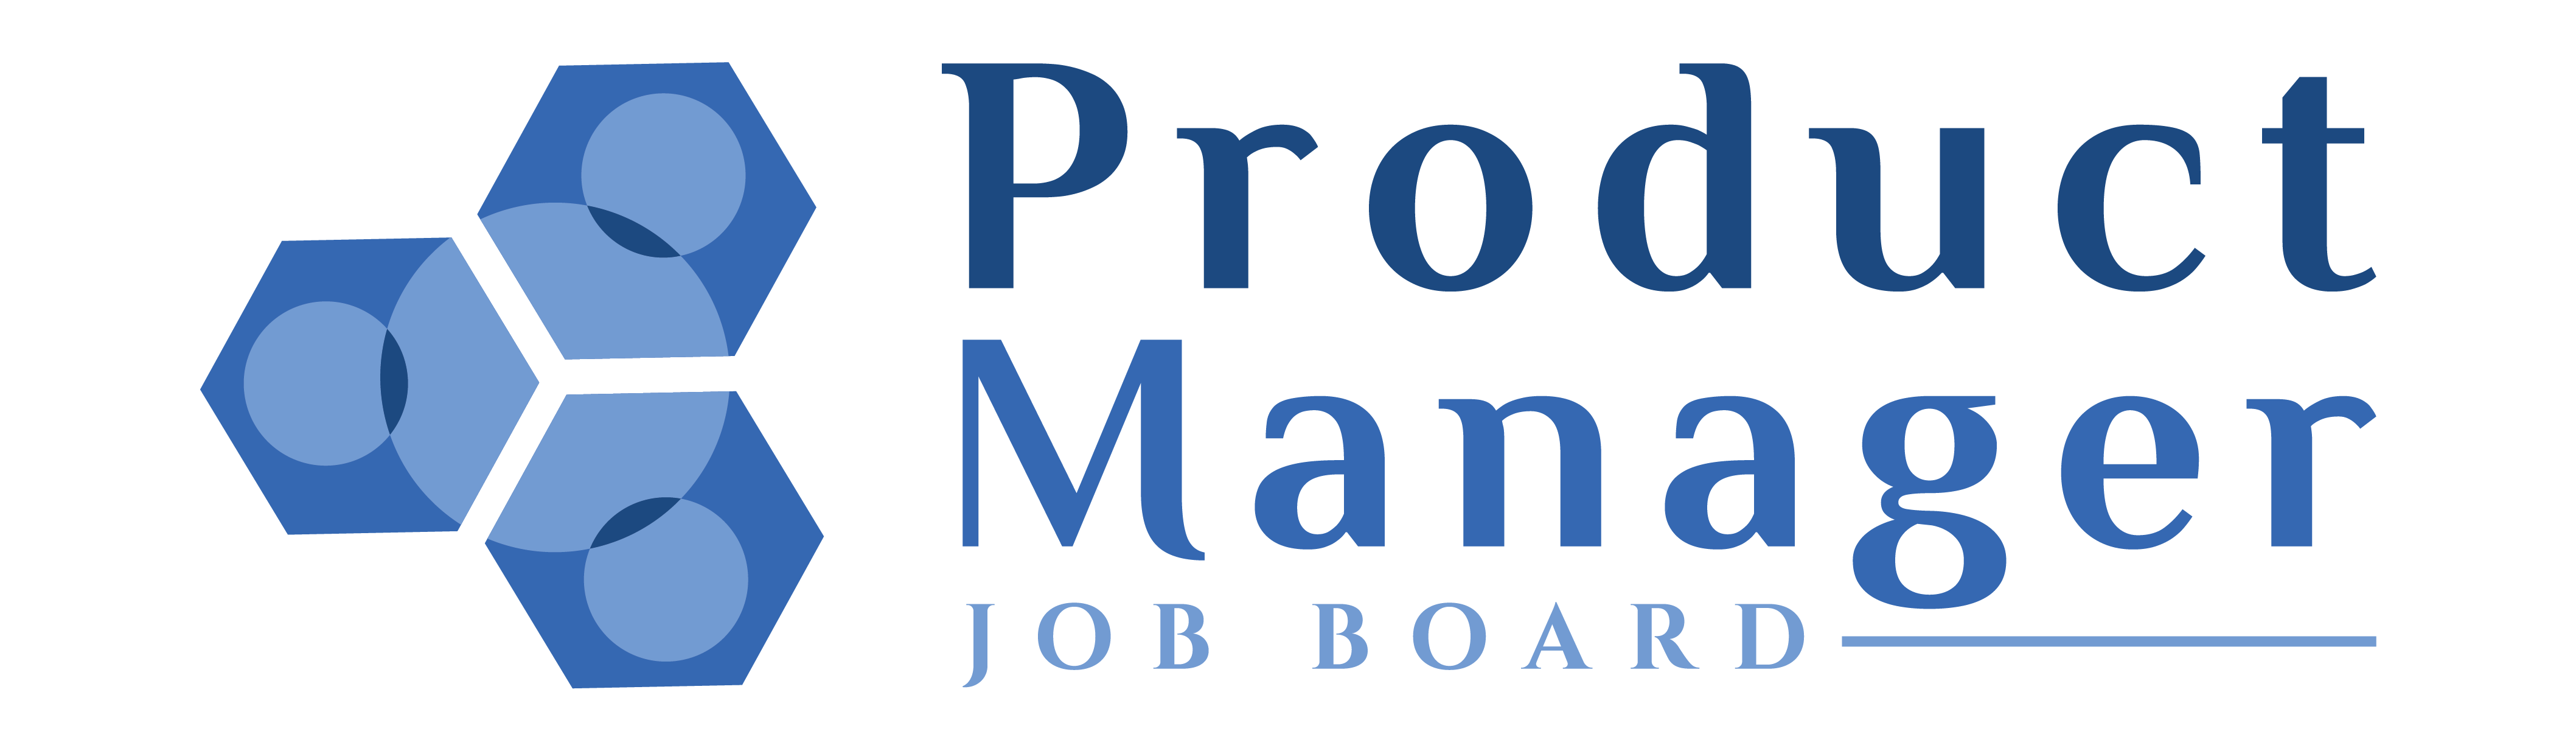 approve-user-product-manager-job-board